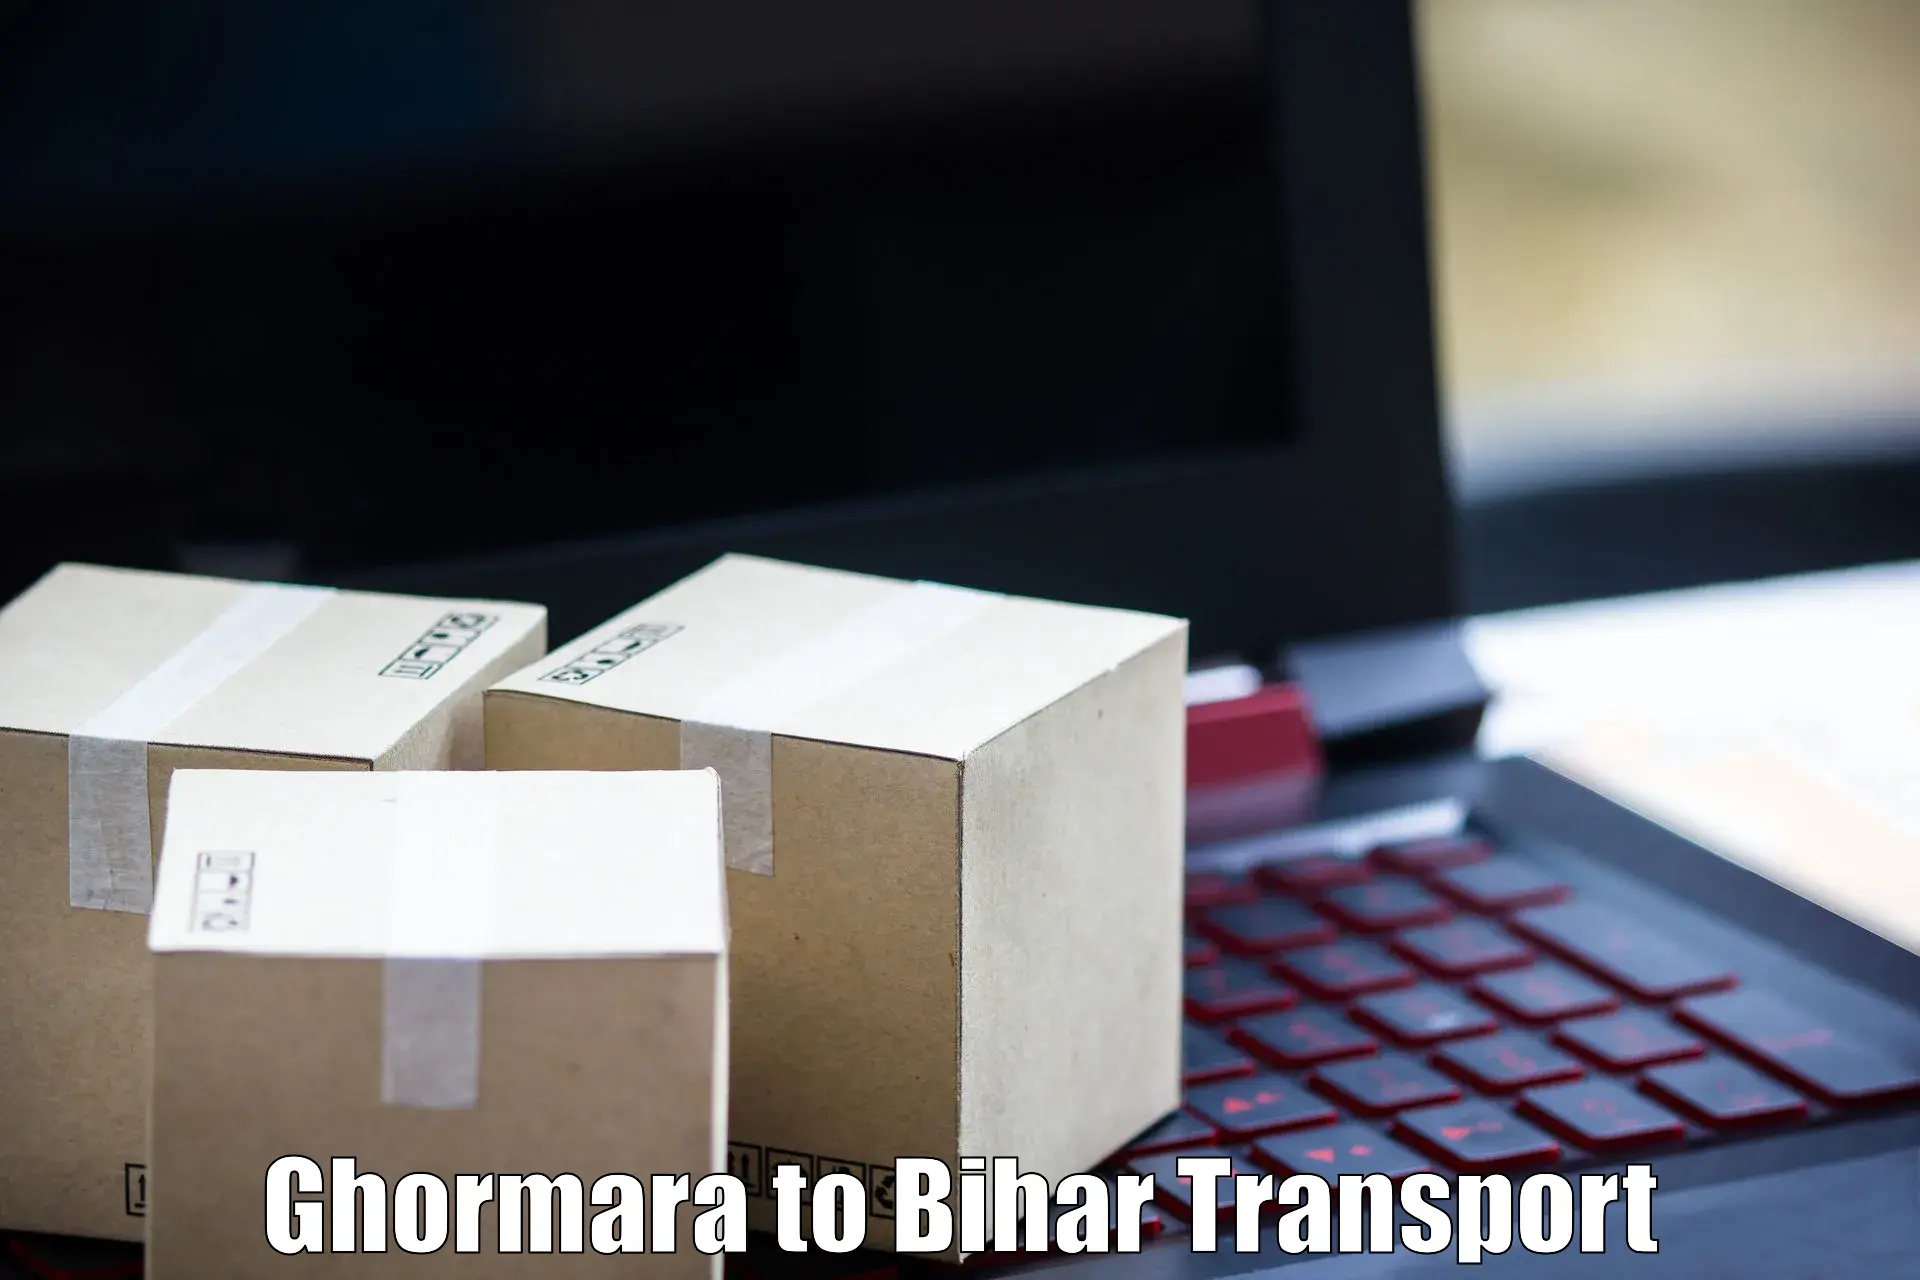 Nearby transport service in Ghormara to Banka